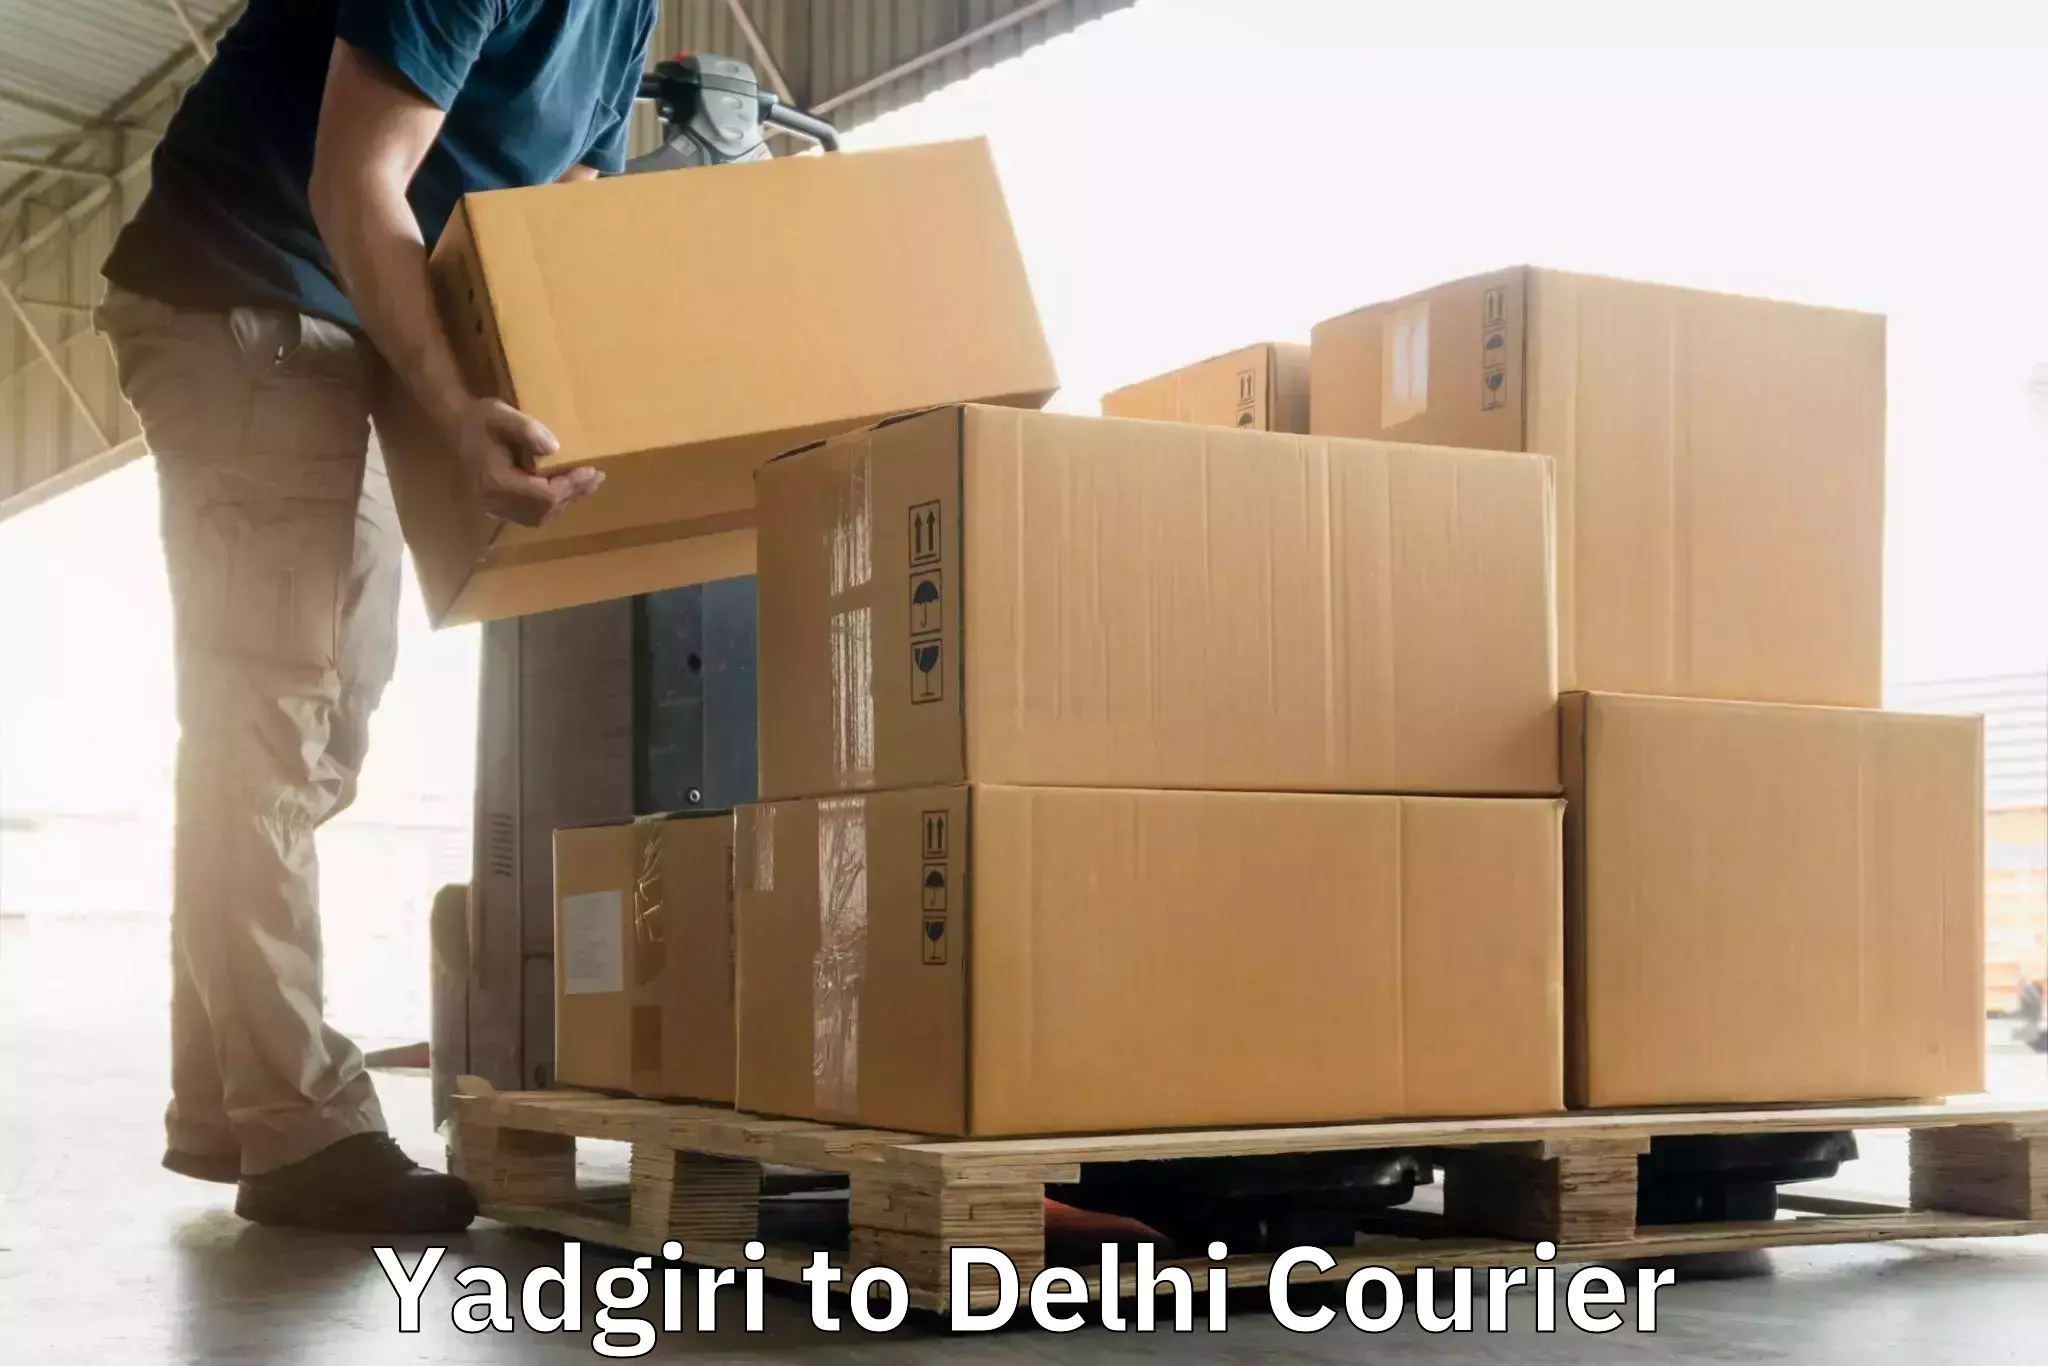 Sustainable shipping practices Yadgiri to Lodhi Road